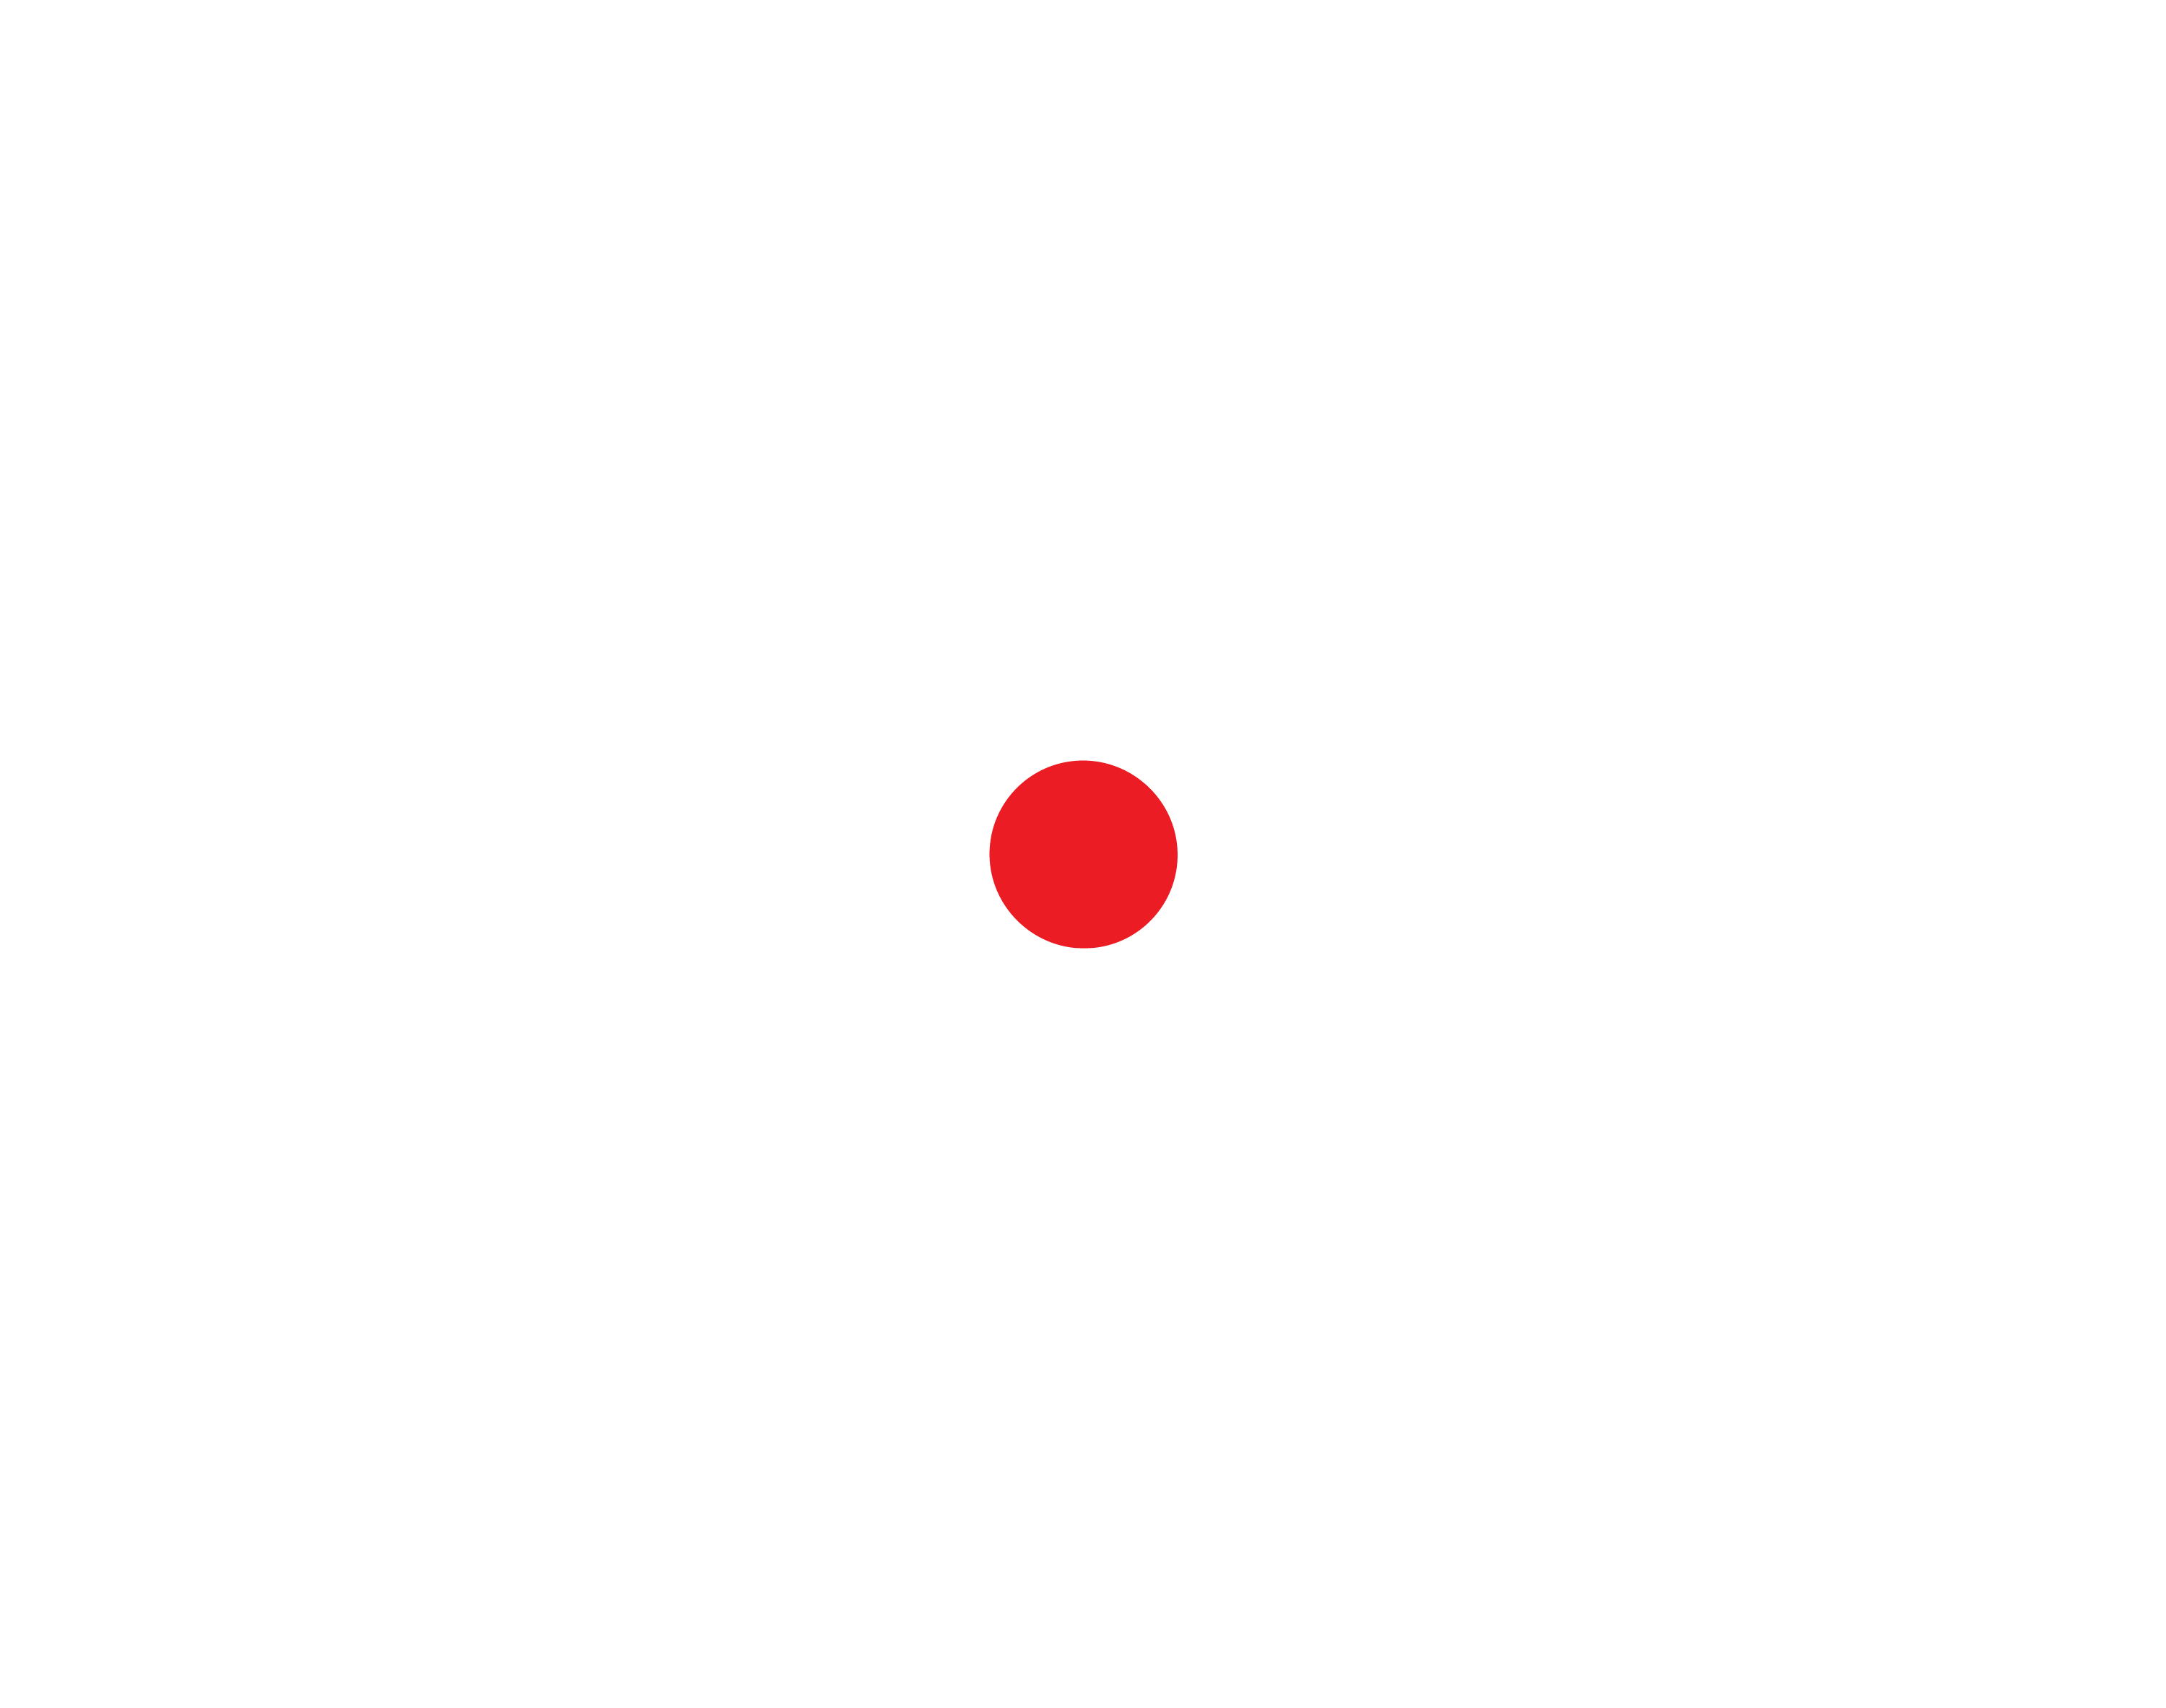 simplify-your-message-photo-single-red-dot-01.png